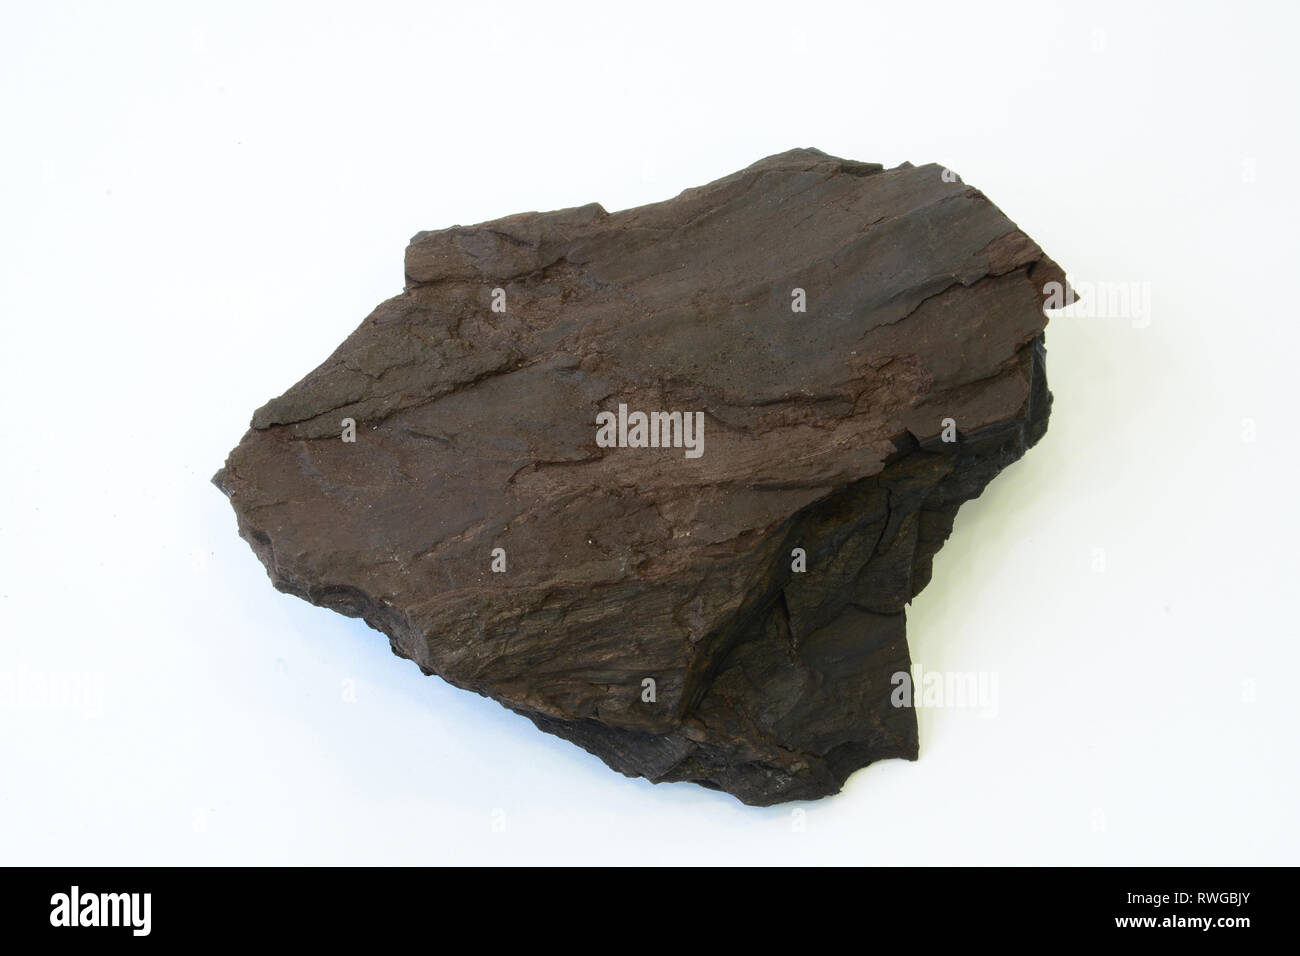 Lignite or brown coal. Piece with faintly recognizable wood structure. Germany Stock Photo